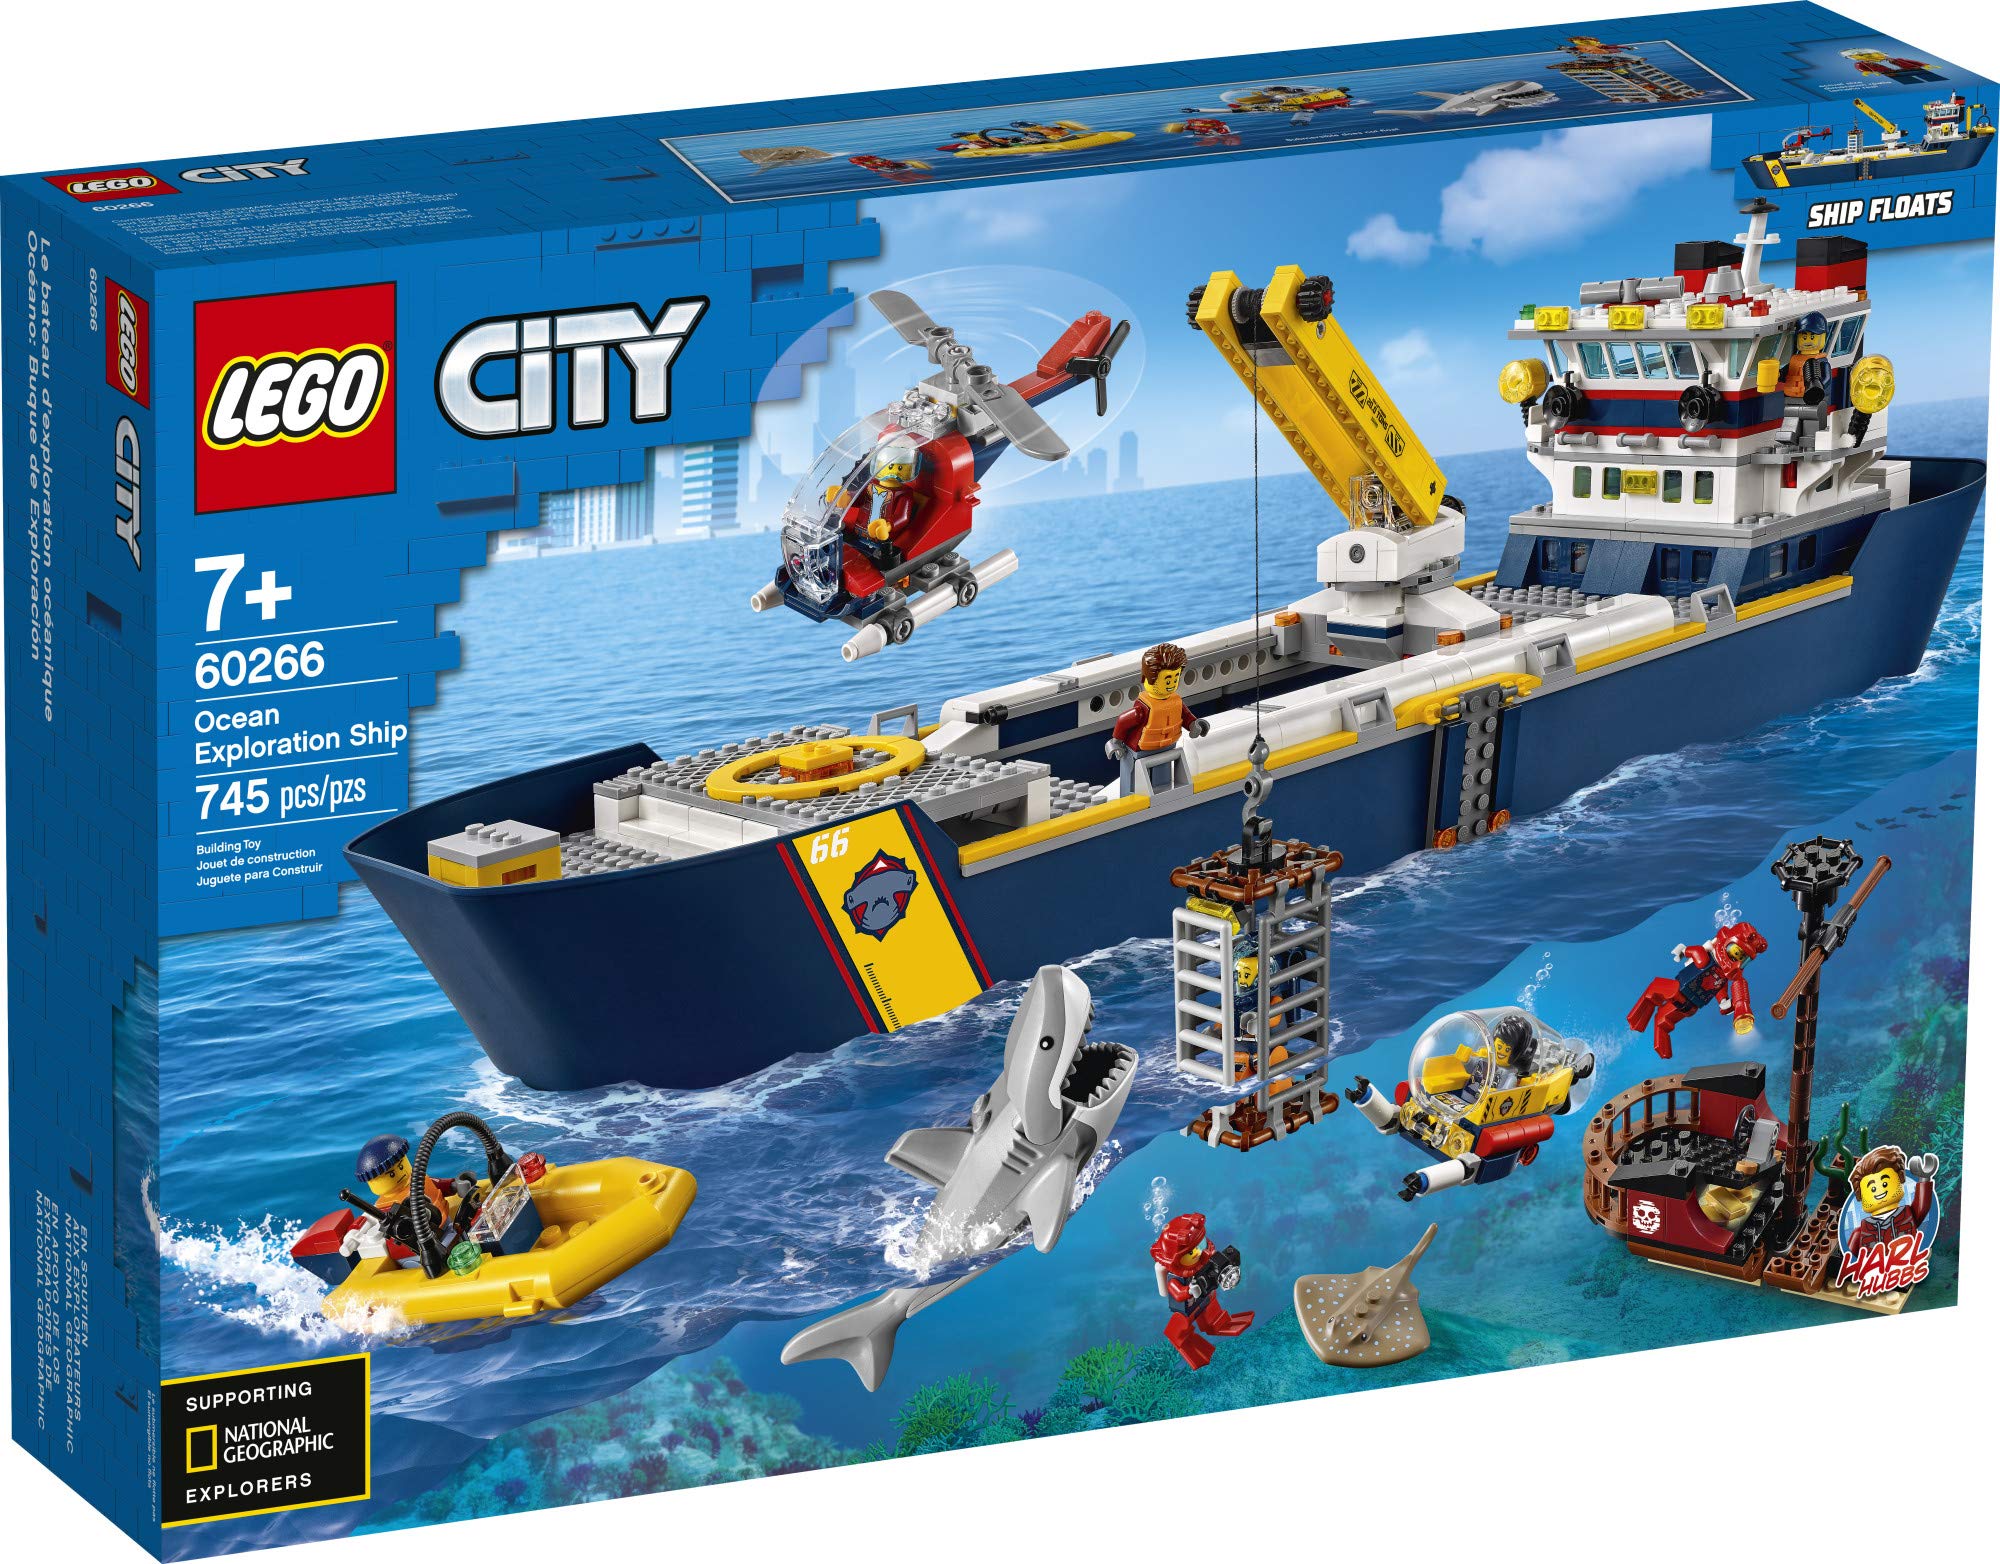 LEGO City Ocean Exploration Ship 60266, Toy Exploration Vessel, Mini Helicopter, Submarine, Shipwreck with Treasure, Lifeboat, Stingray, Shark, Plus 8 Minifigures (745 Pieces)